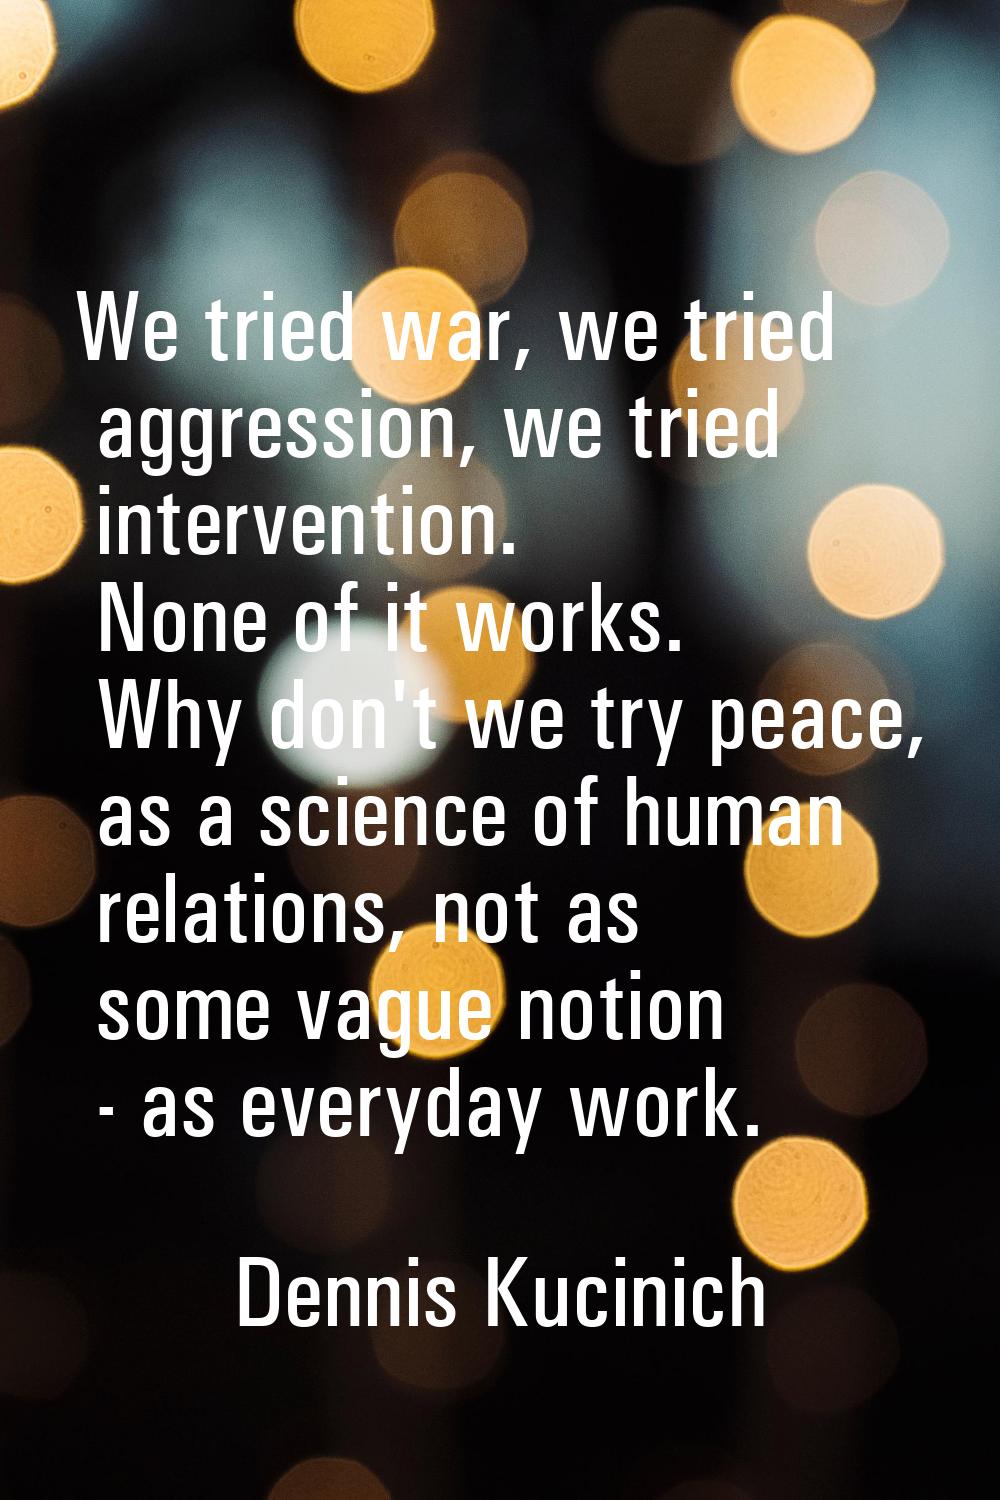 We tried war, we tried aggression, we tried intervention. None of it works. Why don't we try peace,